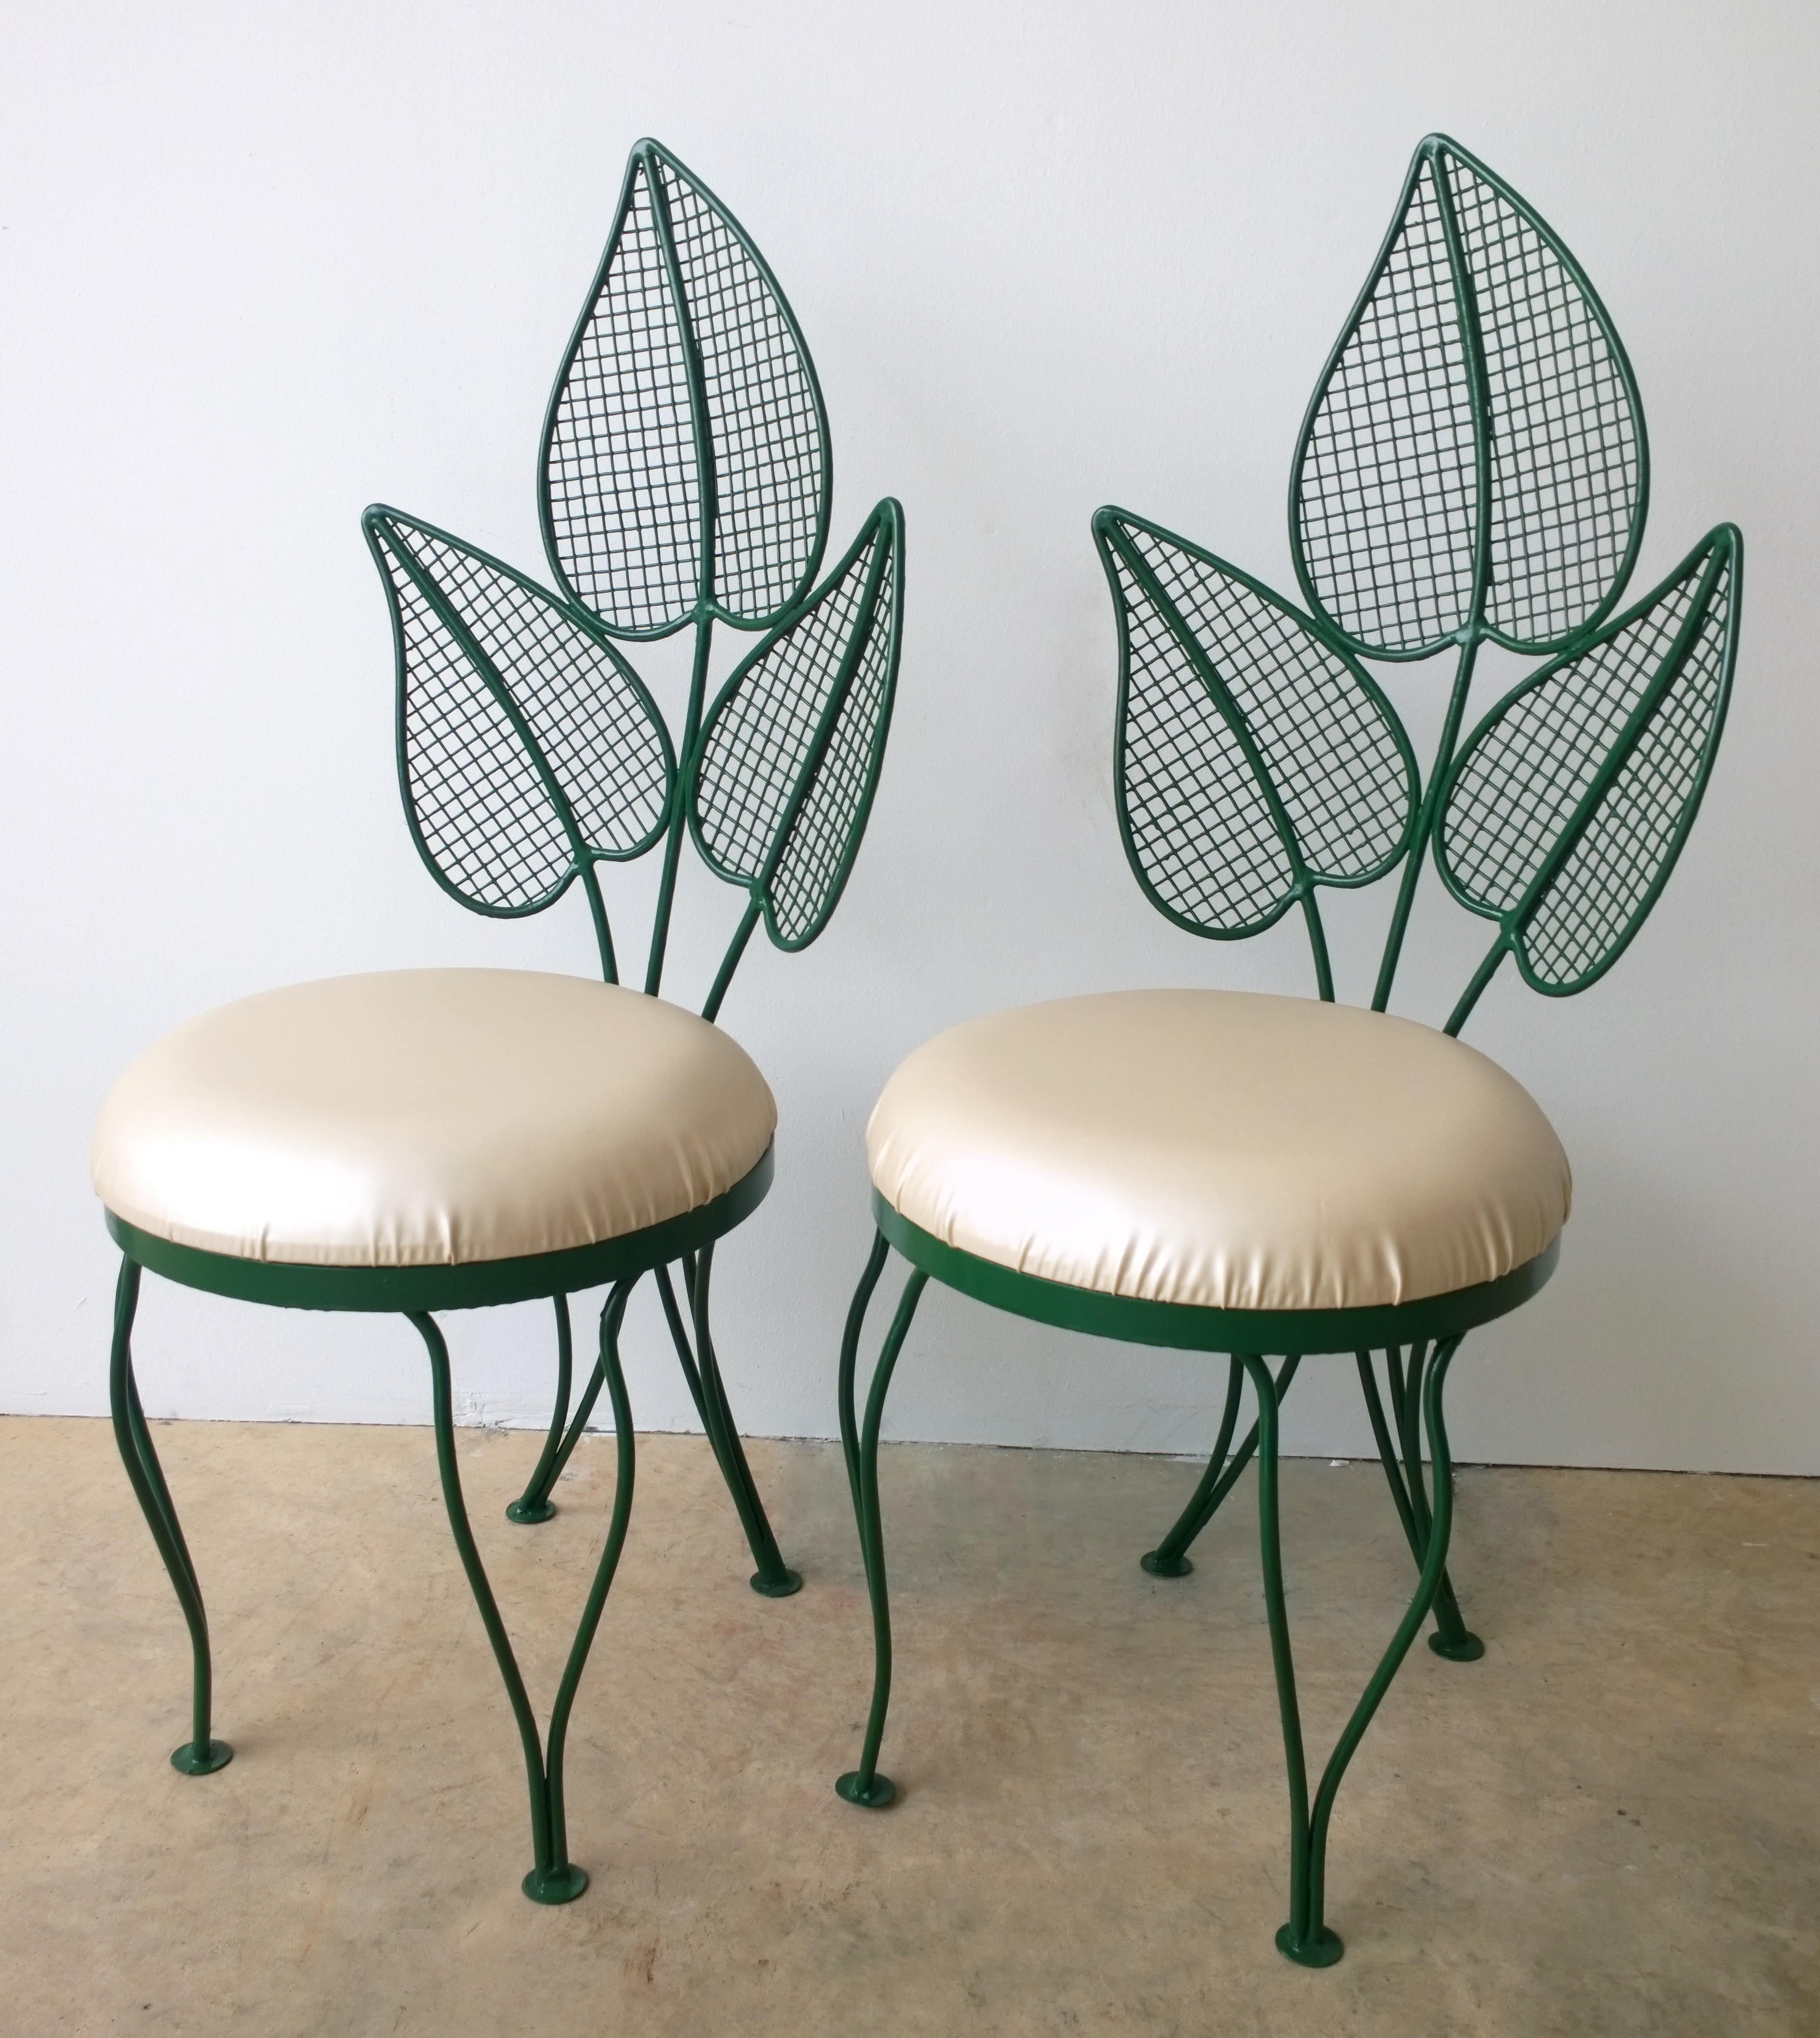 Offered is an extremely rare pair of Mid-Century Modern John Salterini 